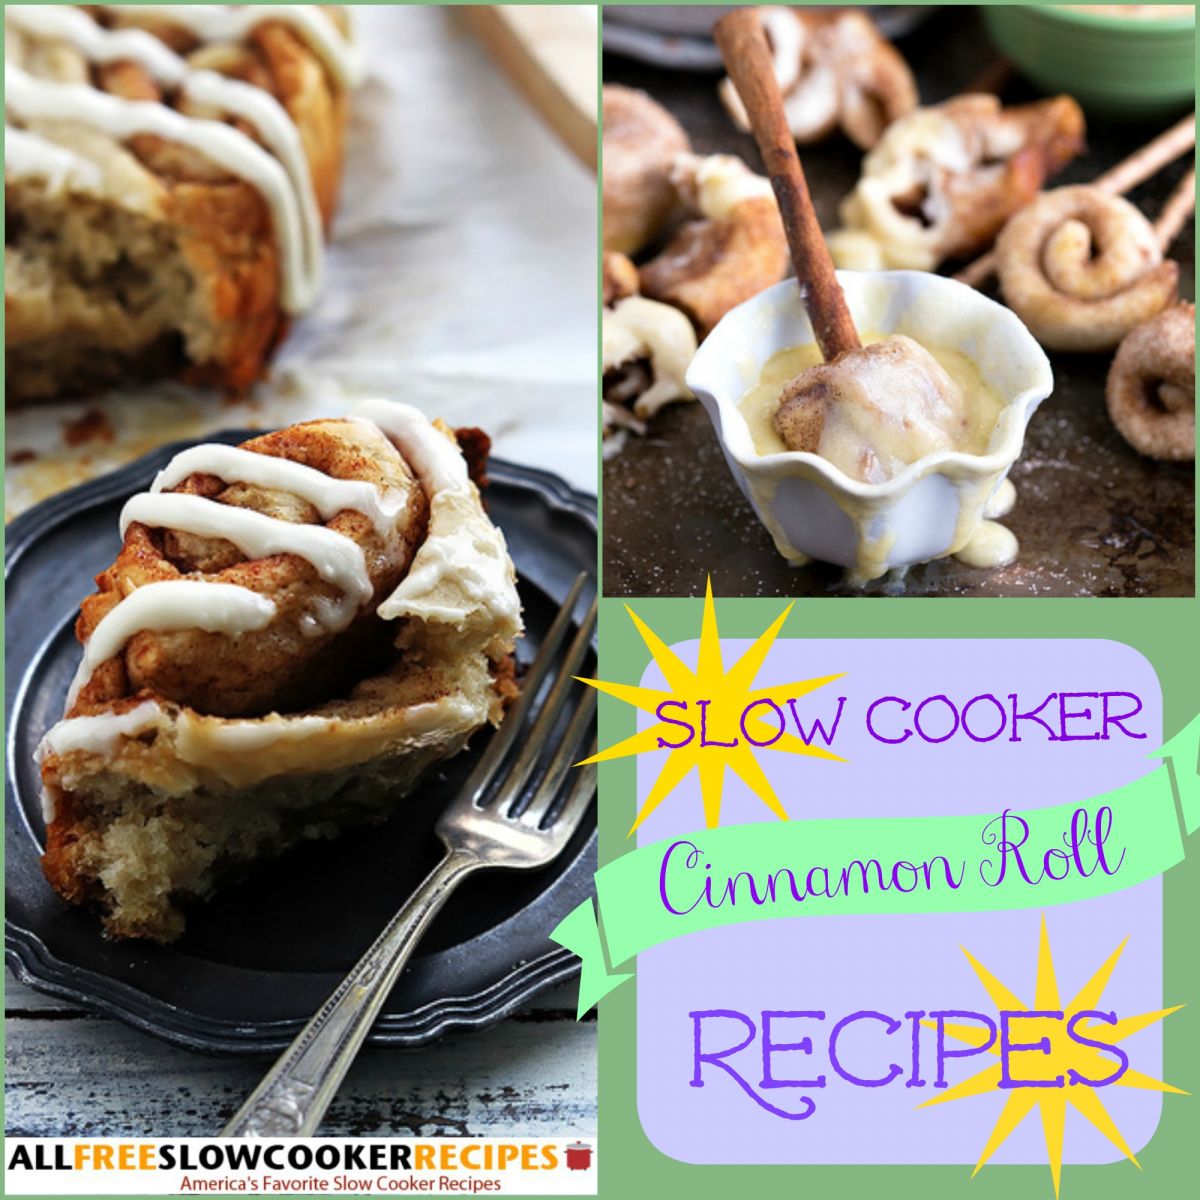 Slow Cooker Cinnamon Roll Recipes